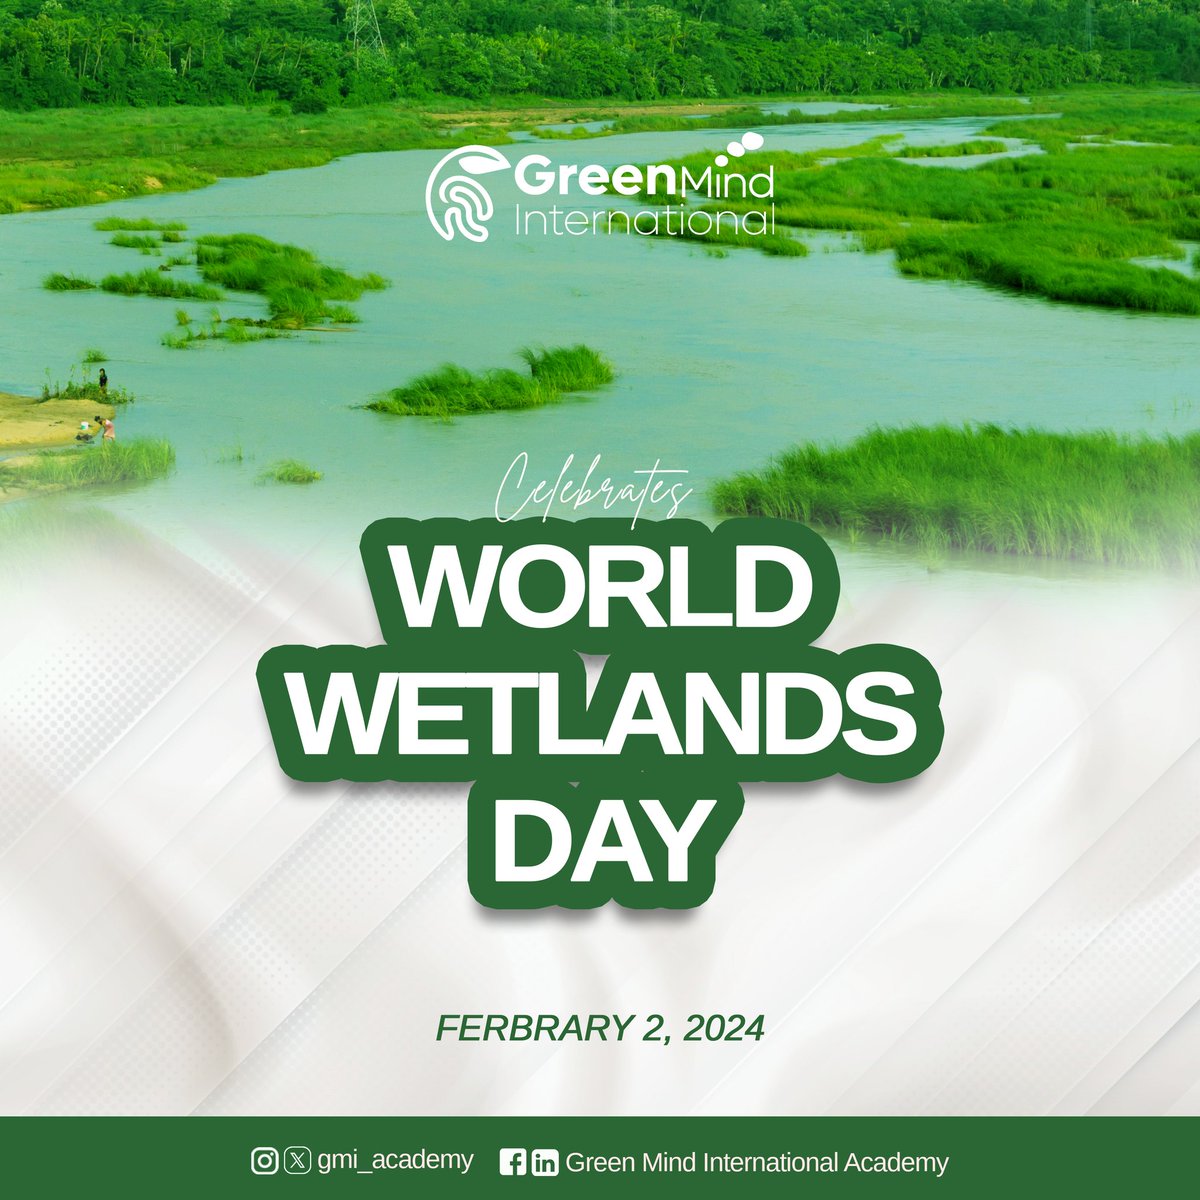 Today, we join the rest of to celebrate the important role wetlands play as the kidney of the earth!

#wetlands #wordwetlandsday #environmentaleducation #environmentalsustainability #gmi